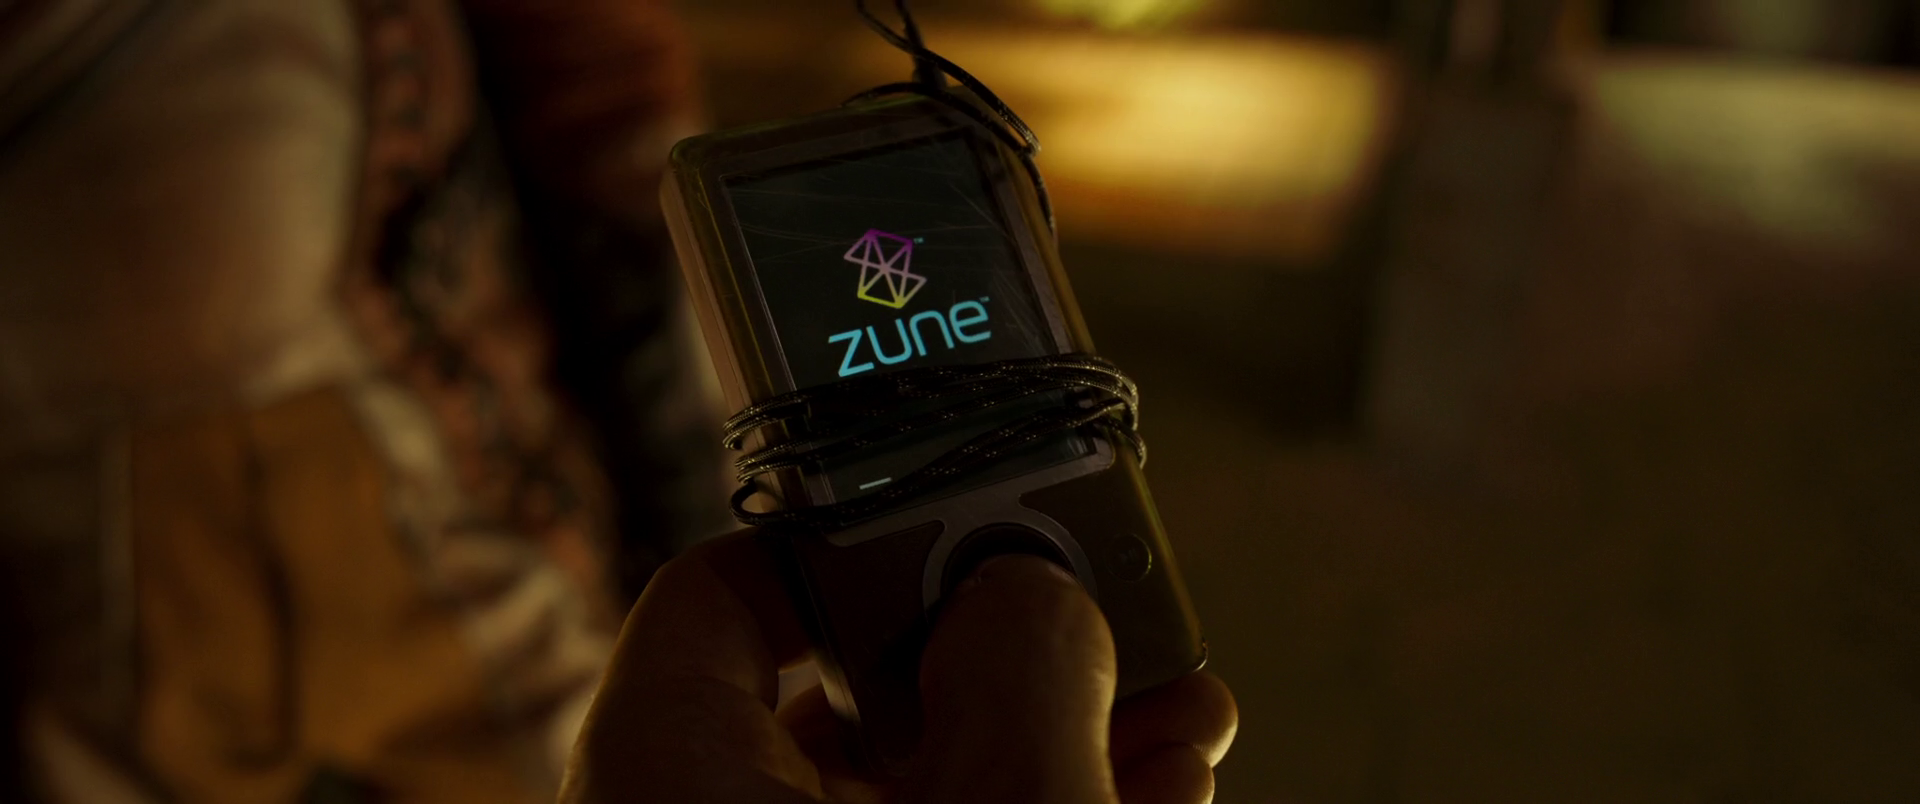 Starlord's Zune in 'Guardians Of The Galaxy Vol. 2'